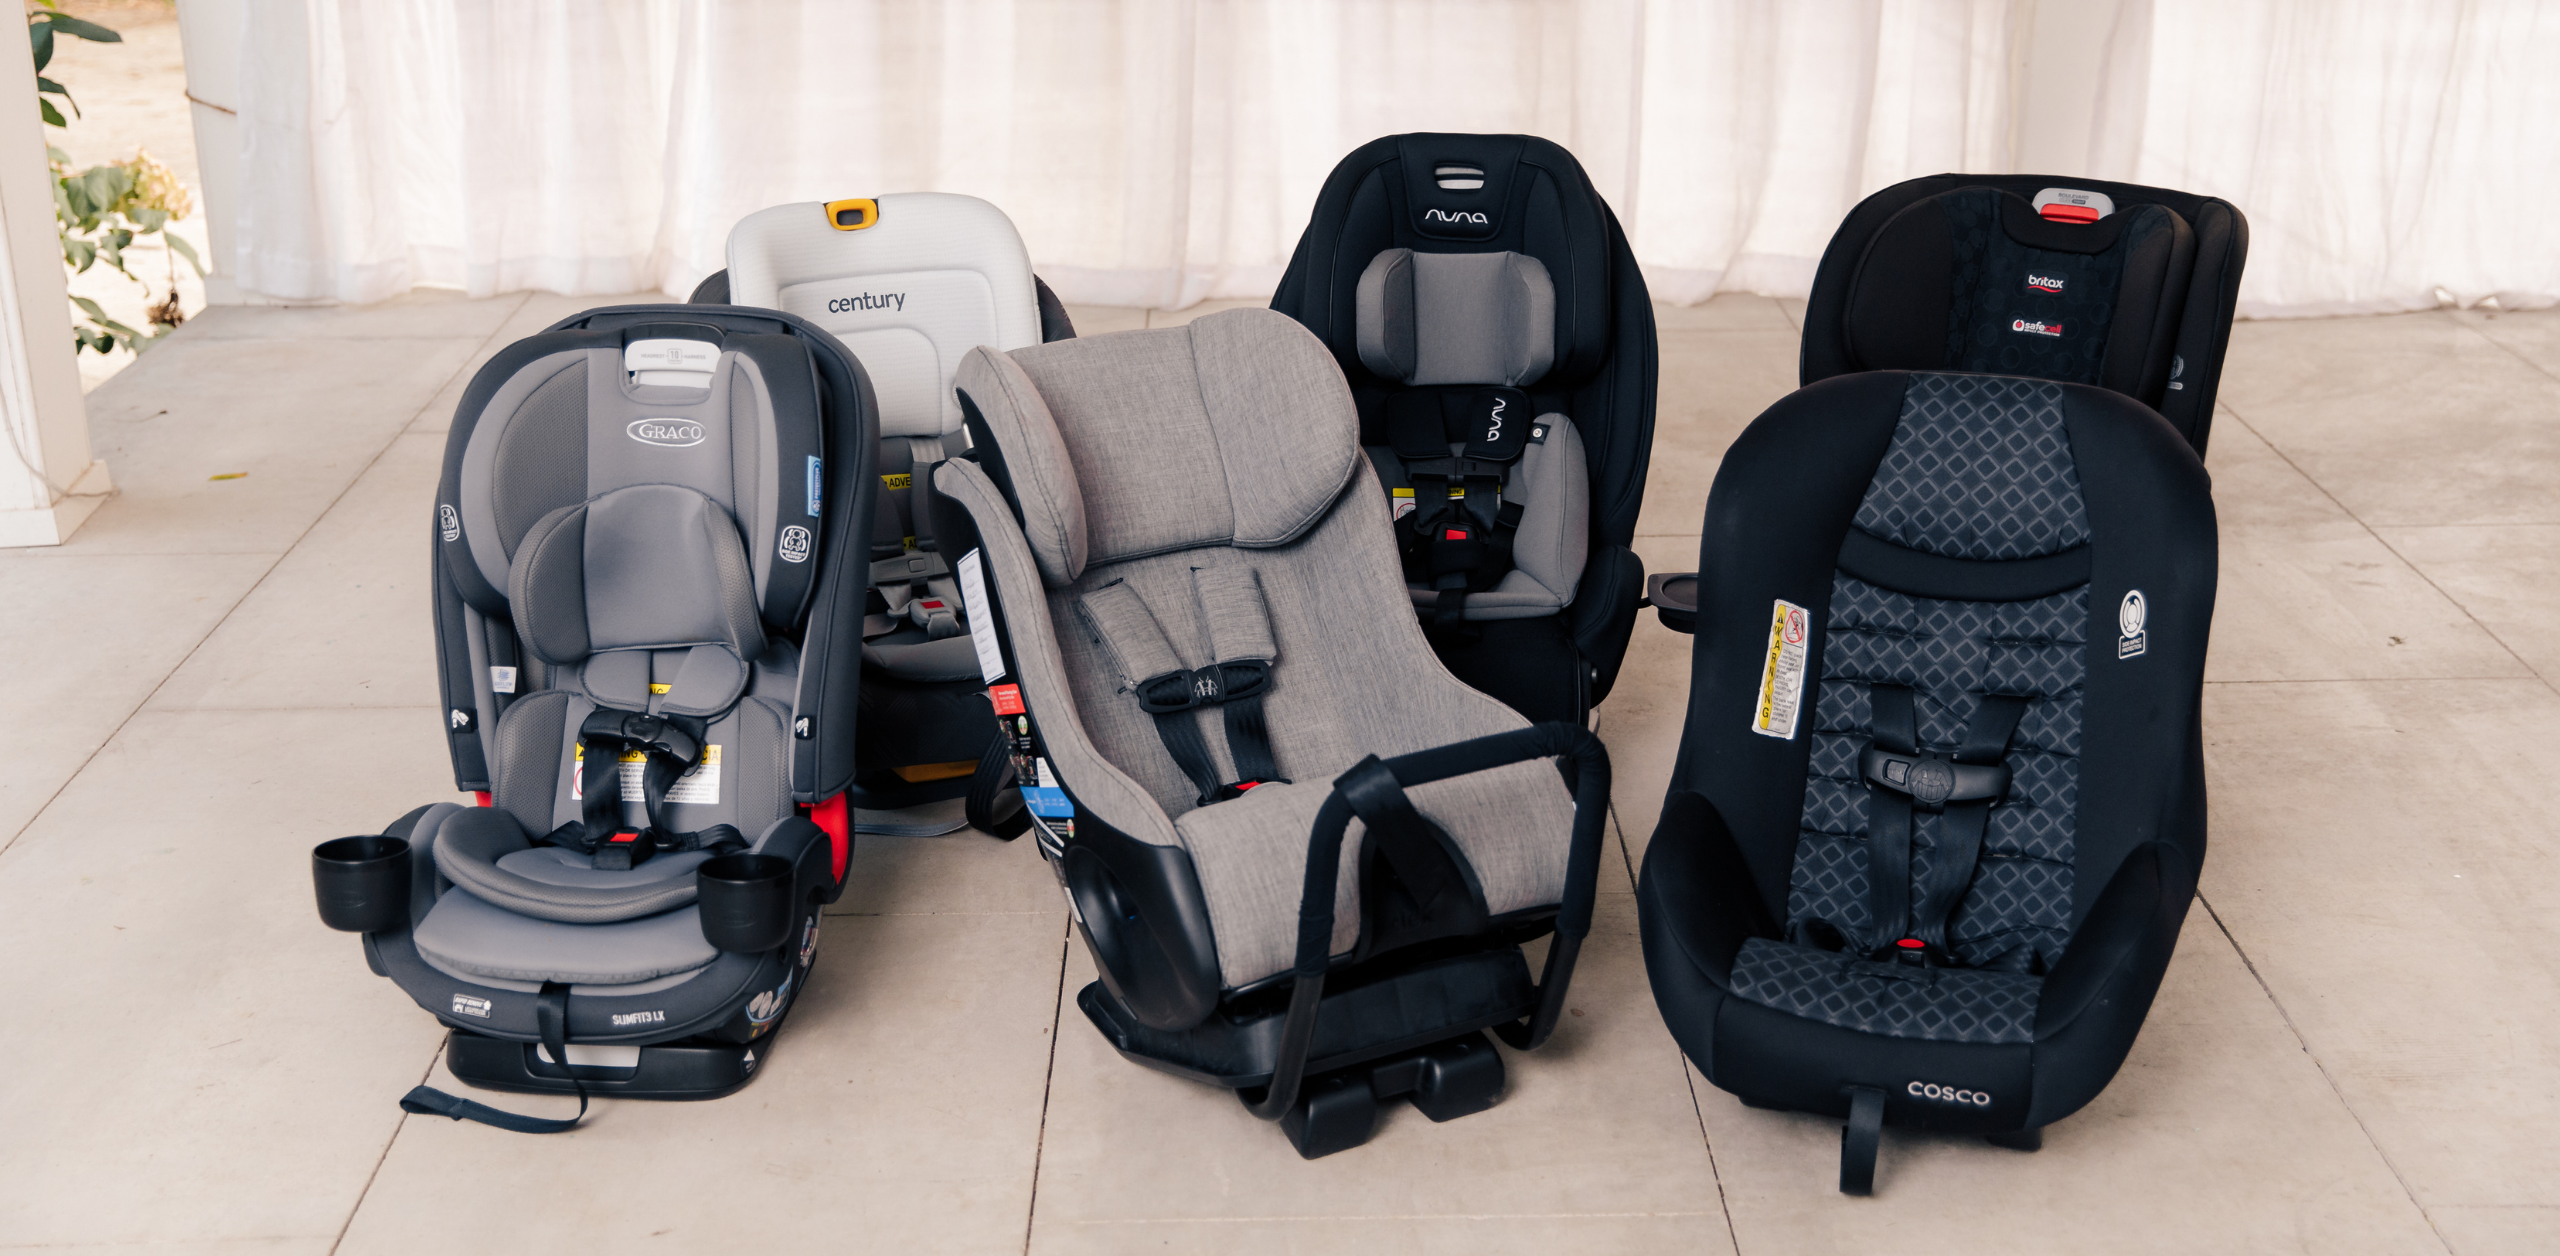 How to Choose a Car Seat for Your Toddler